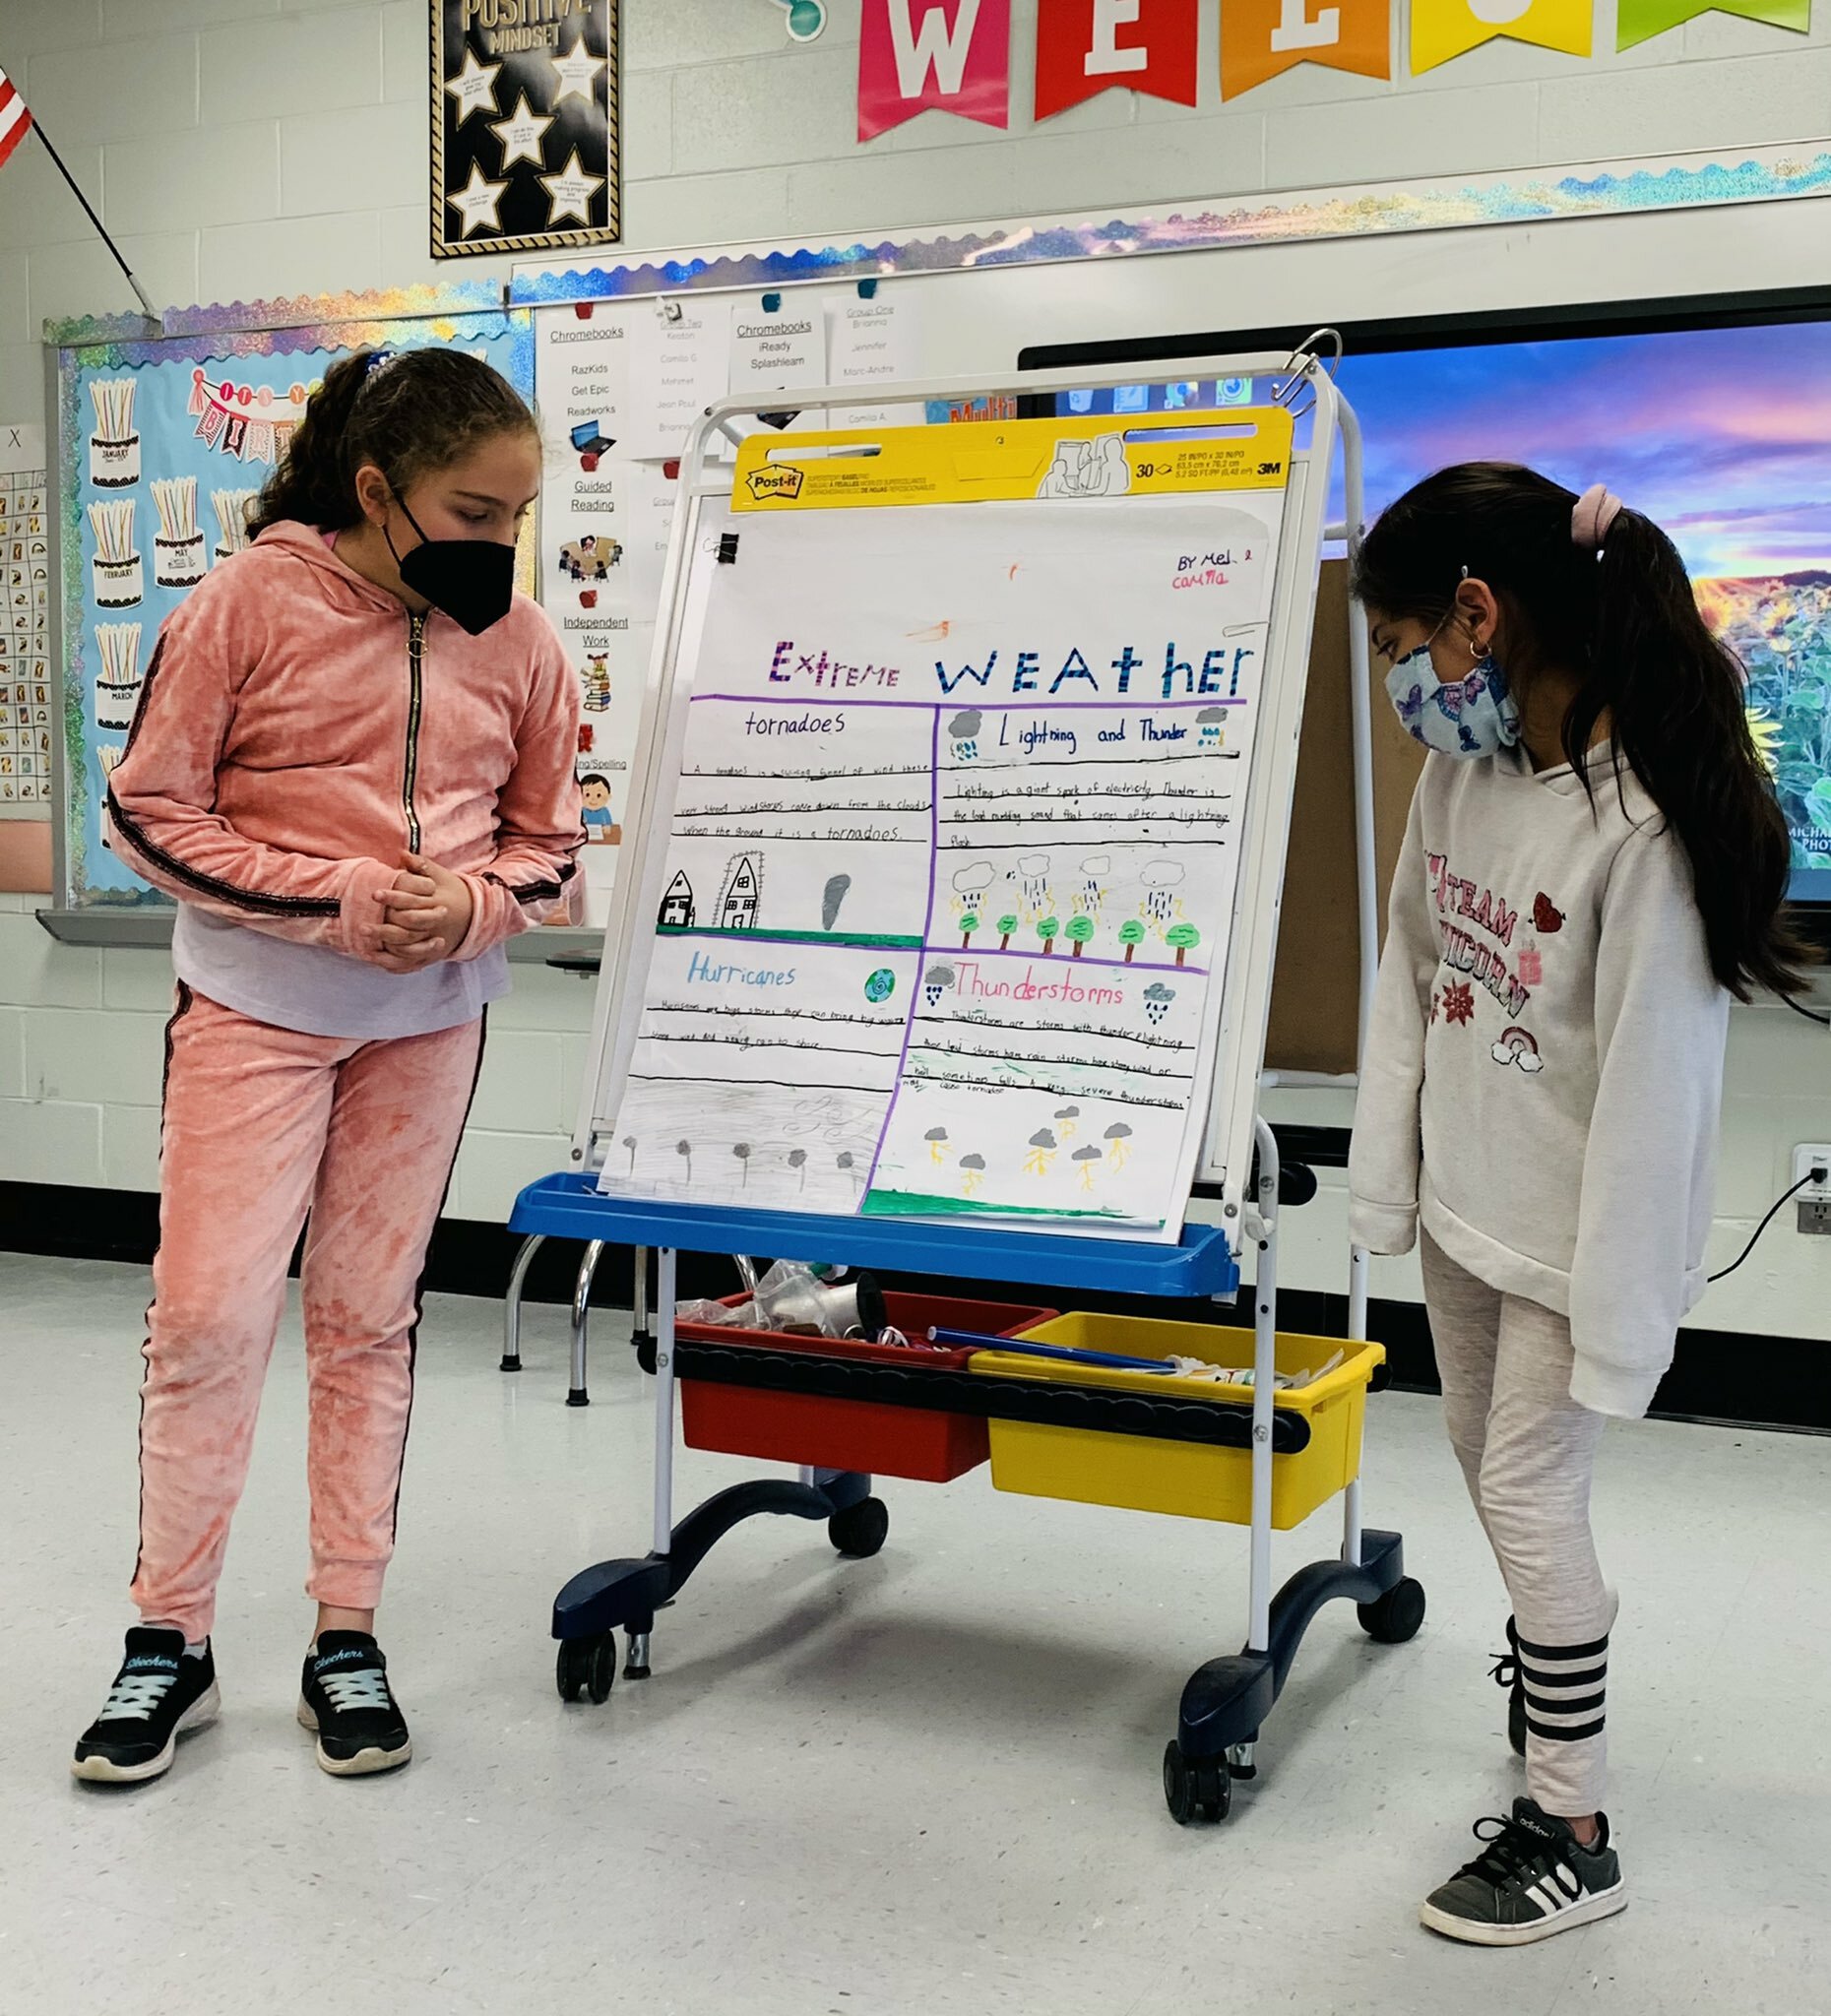 Krista Savino’s fourth grade class at Hampton Bays Elementary School recently explored various types of extreme weather. Following their research, they designed posters showcasing what they had learned and presented them to their peers.